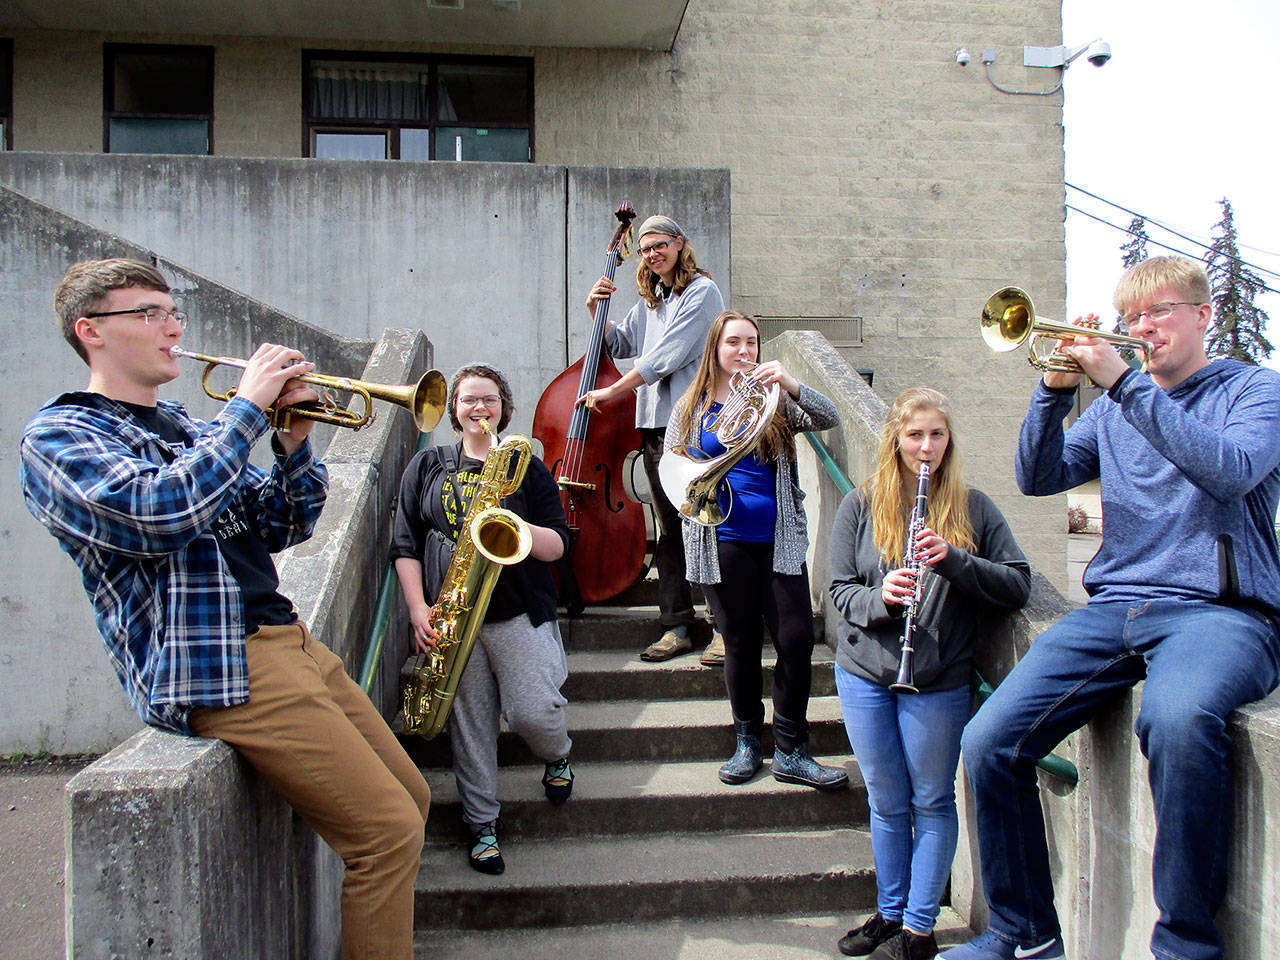 Some of the senior student musicians who will perform and assist with Trivia Night include, from left, Alden Riski, Kennedy Cameron, Jared Van Blair, Grace Sanwald, Lexie Peabody and Justin Parker. Riski, Cameron and Van Blair perform with the jazz ensemble, while Sanwald, Peabody and Parker perform with the wind ensemble and serve as band officers.